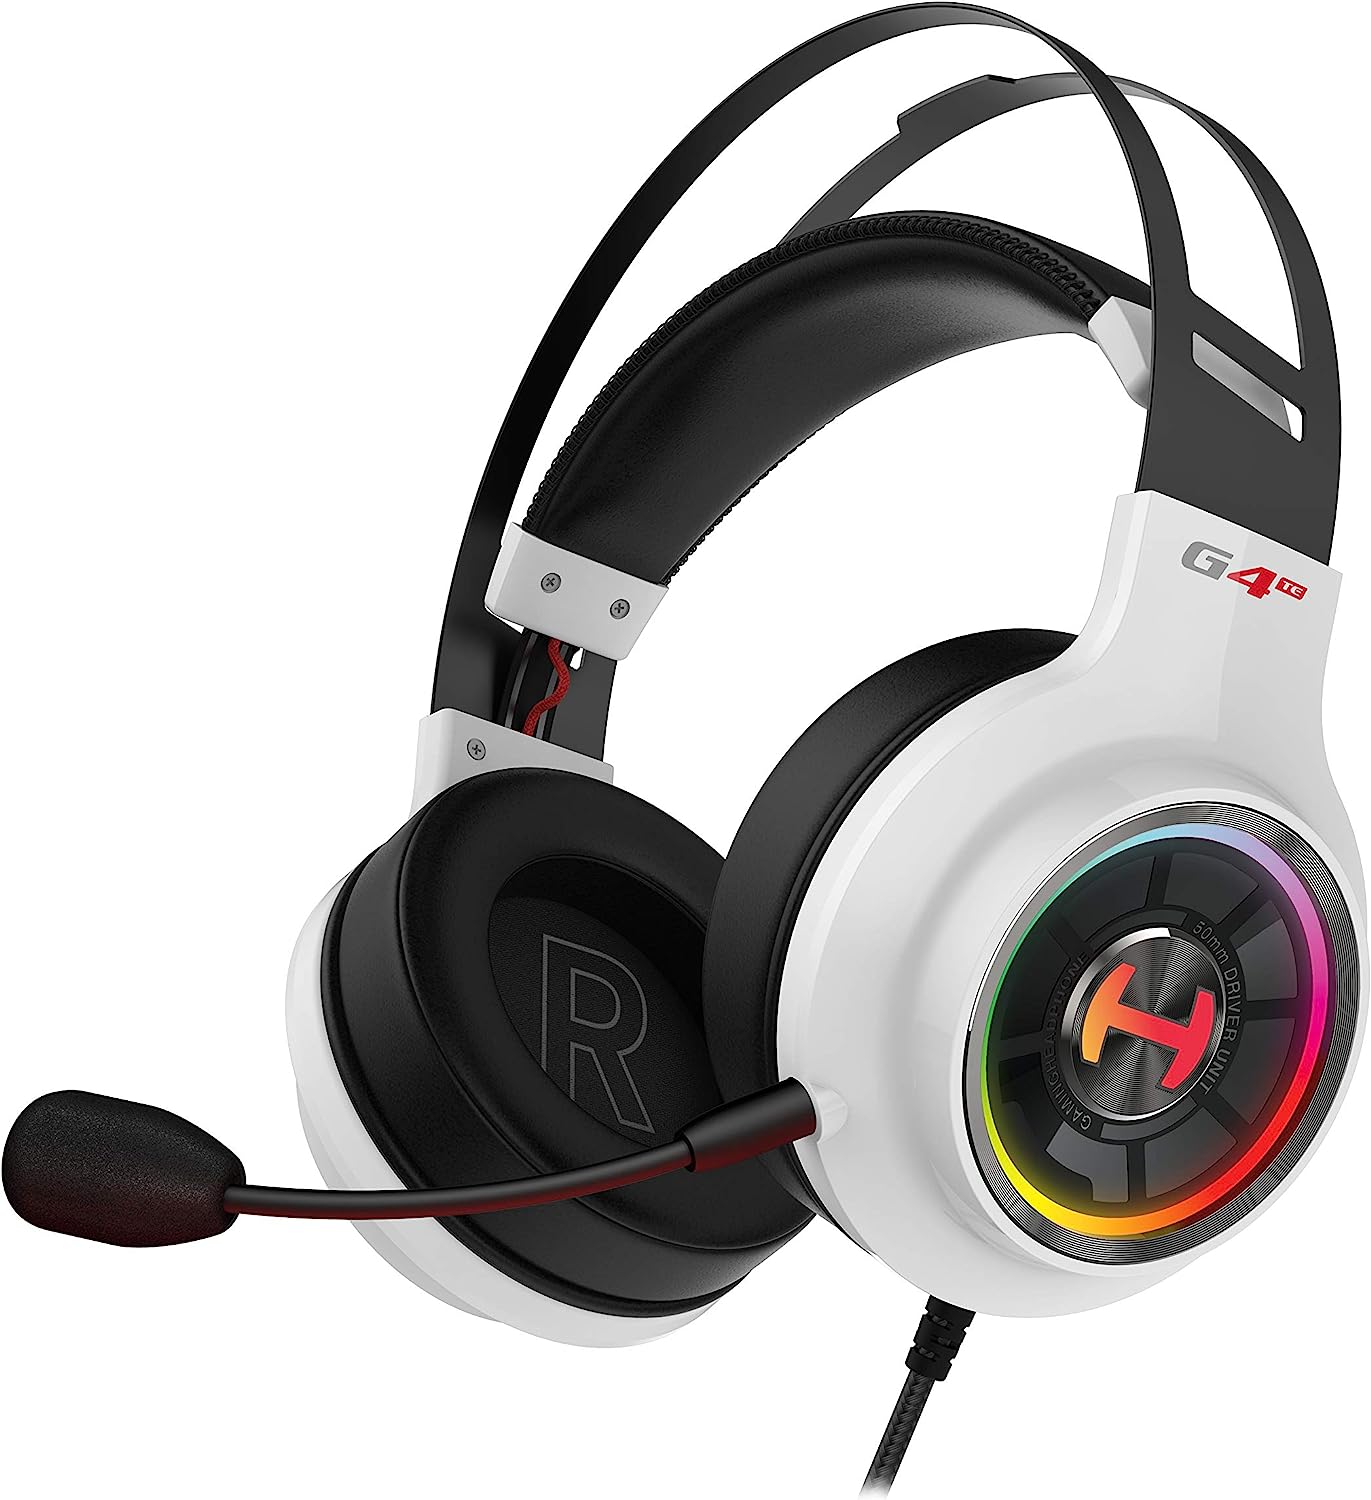 Wired Gaming Headset G4